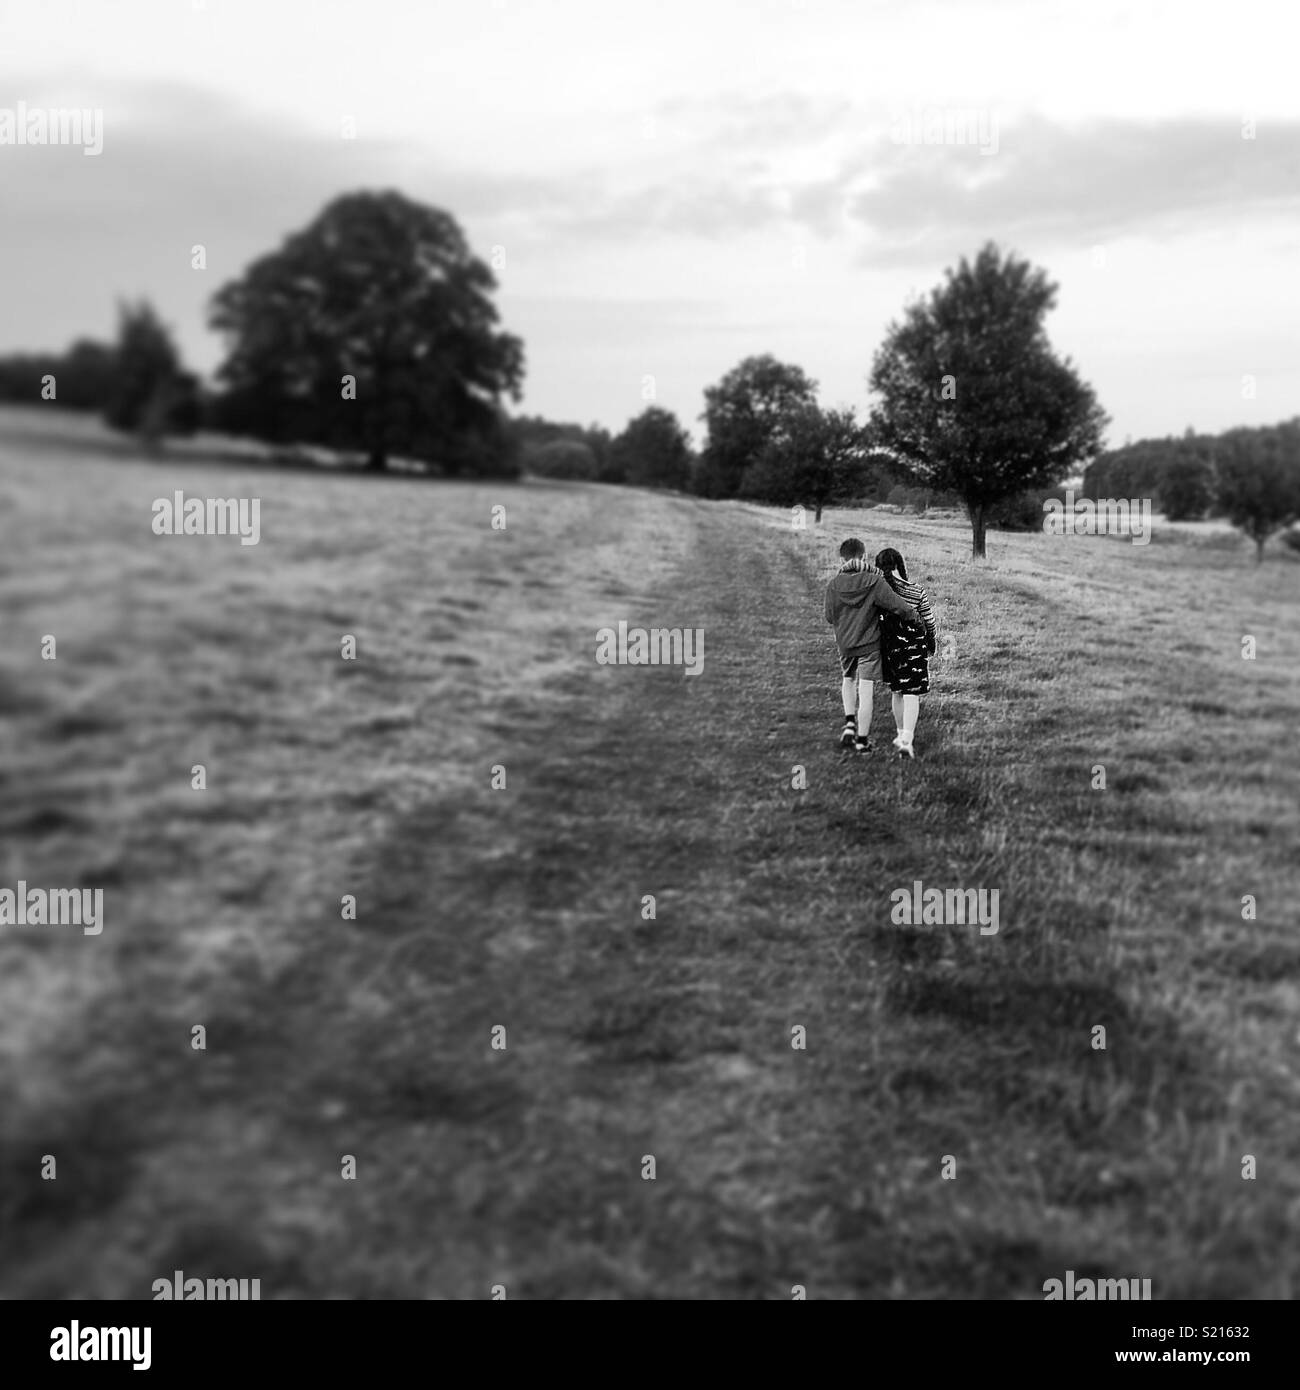 Children Black and White Stock Photos & Images - Alamy